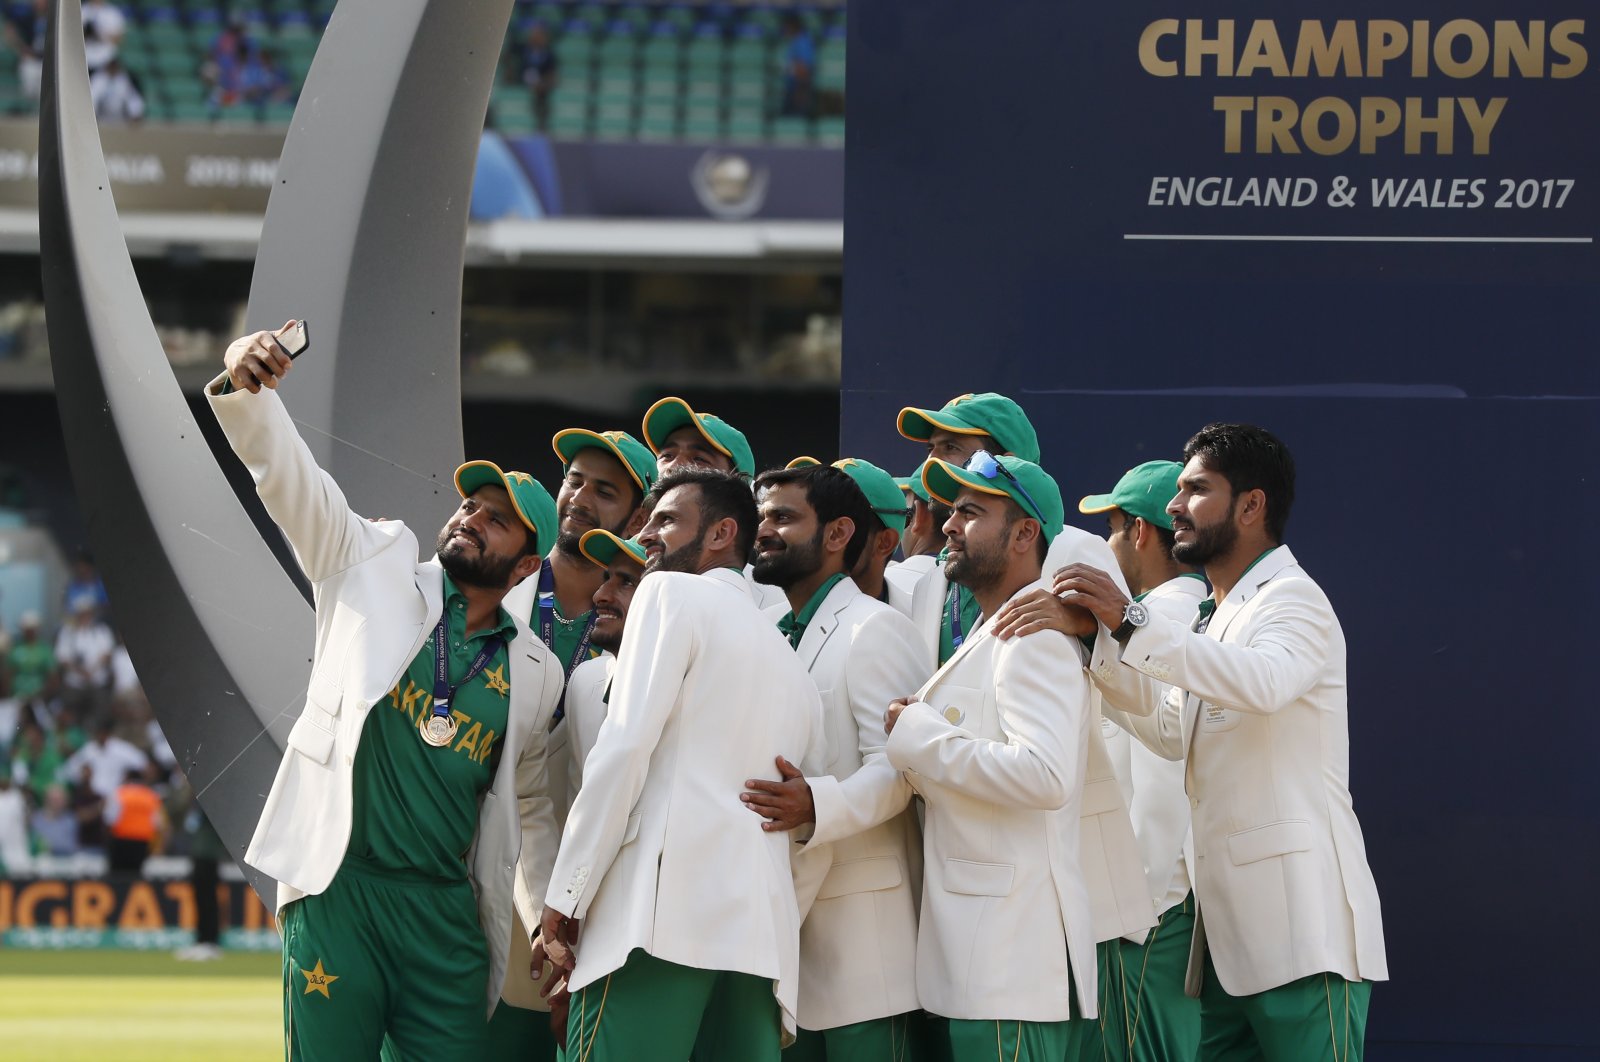 Pakistan players take a selfie at the podium after winning the ICC Champions Trophy at The Oval, London, England, June 18, 2017. (AP Photo)